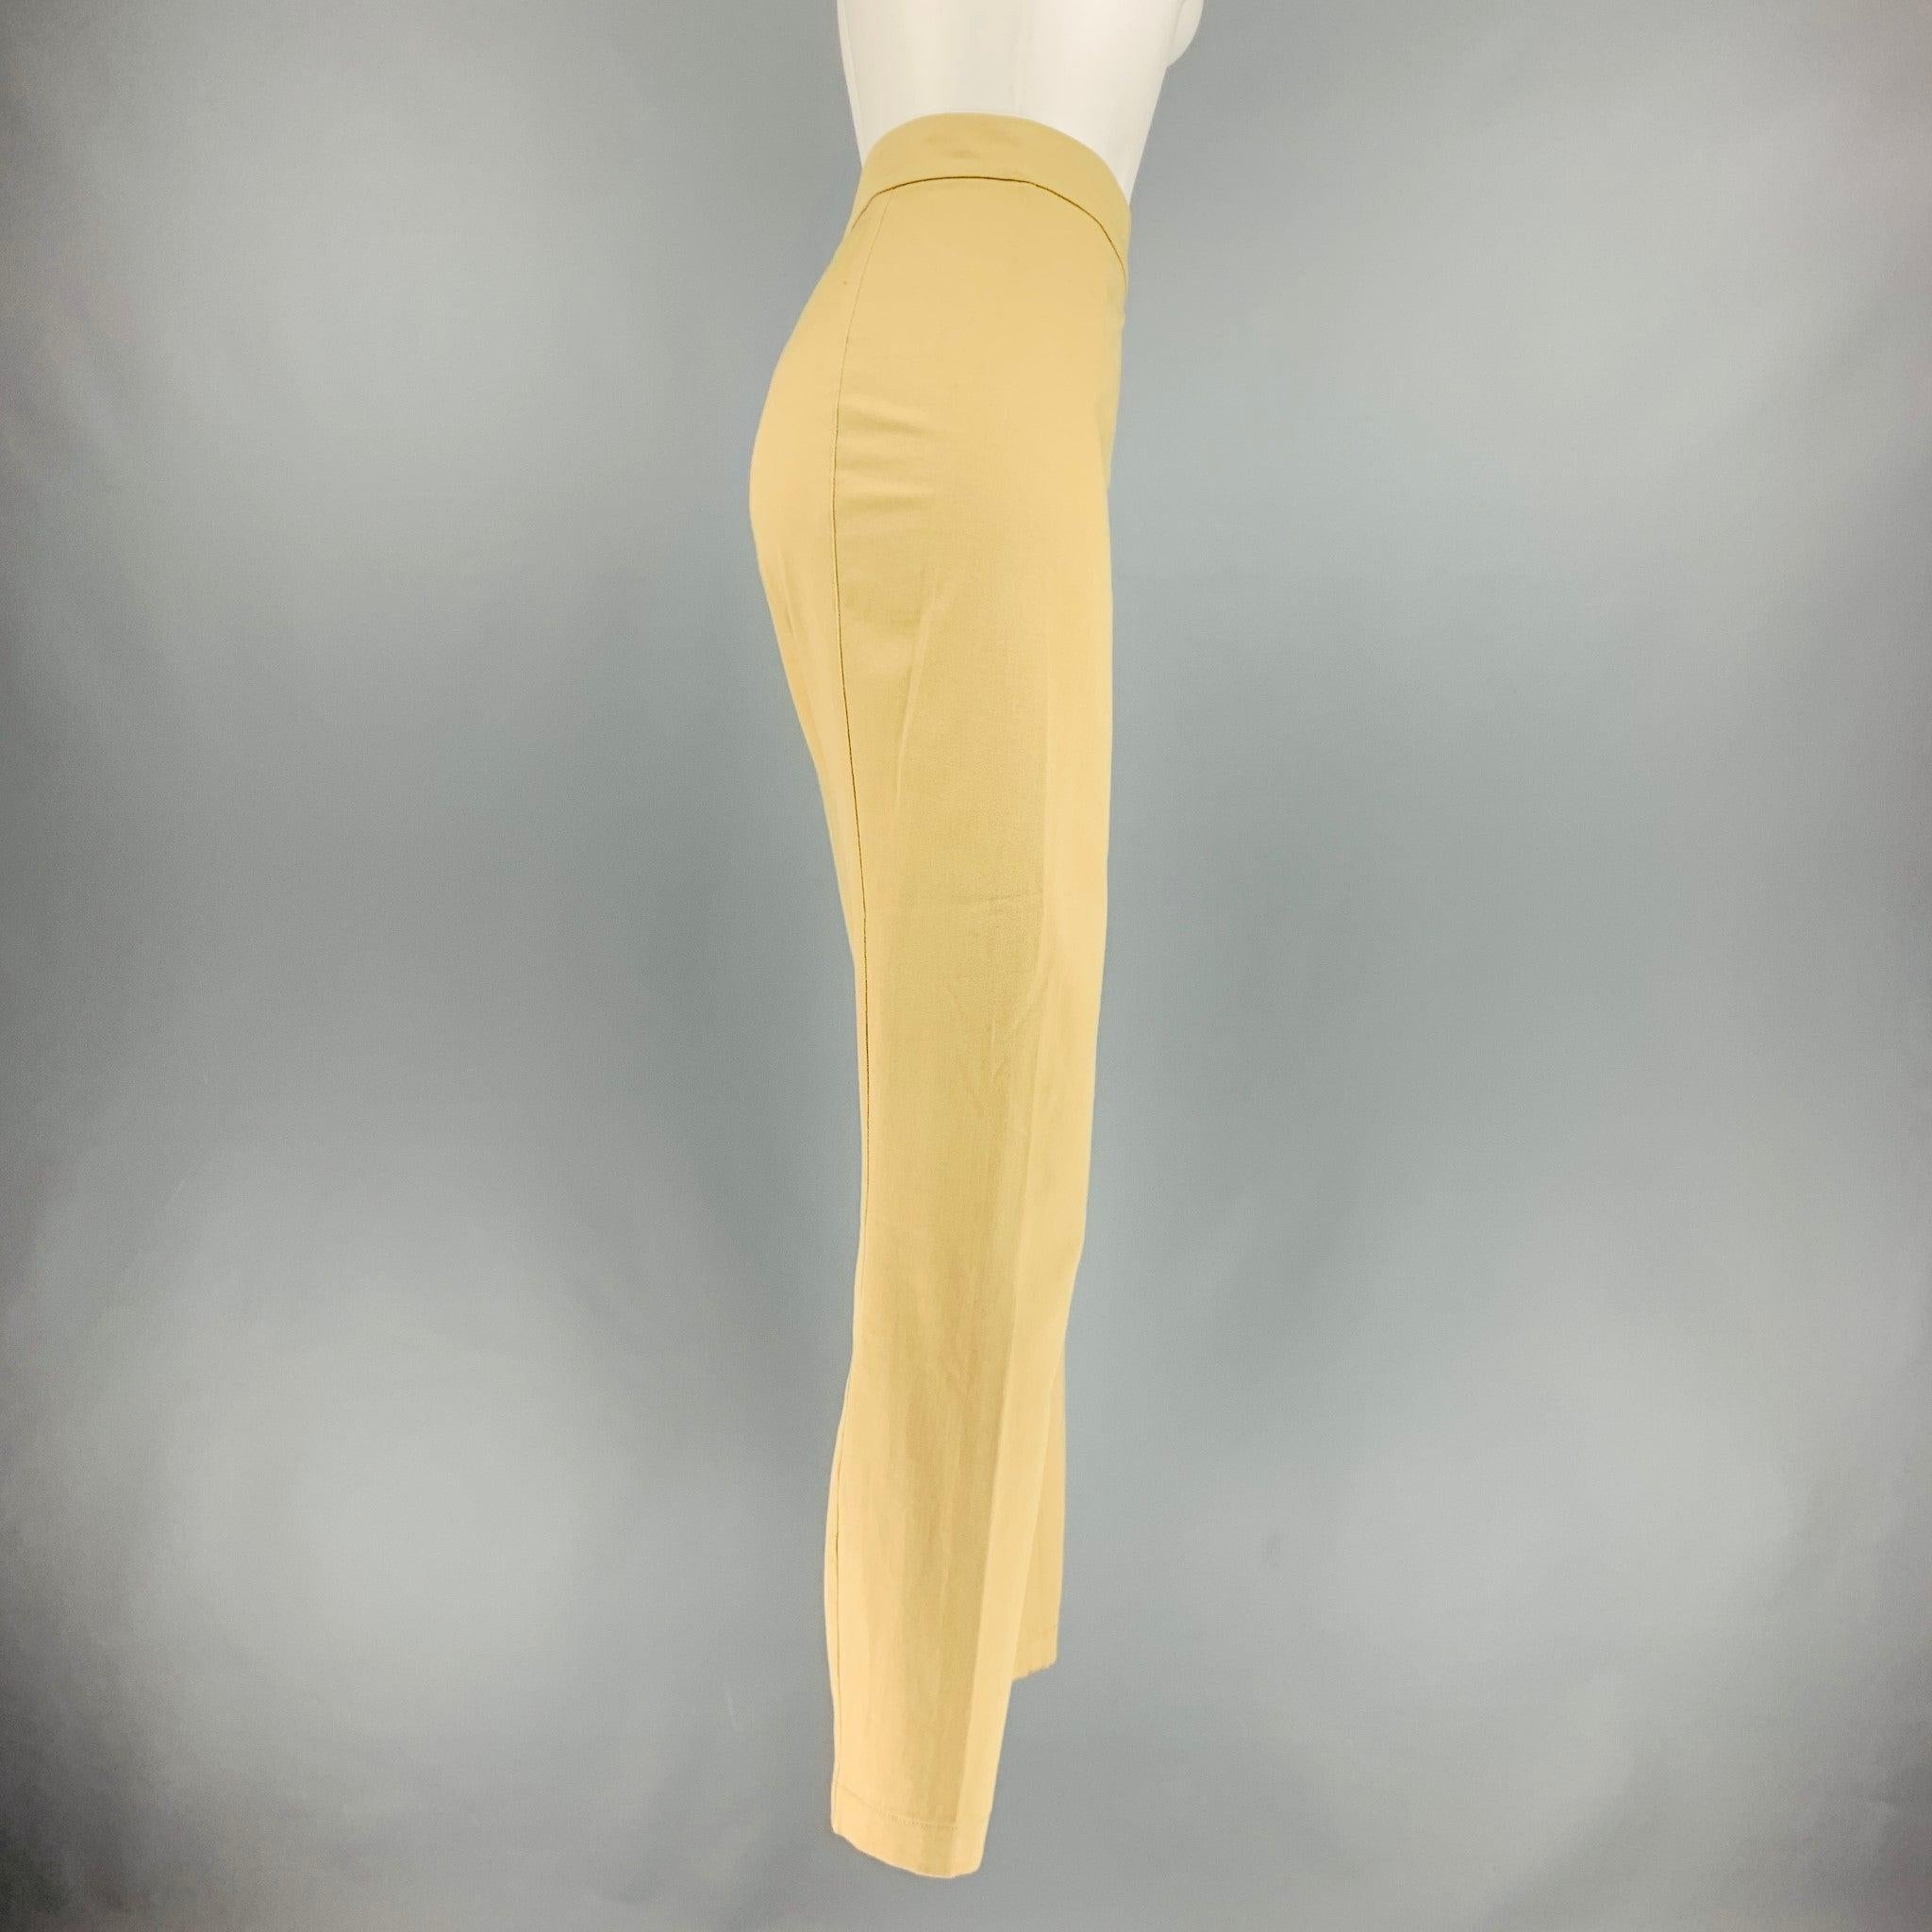 RALPH LAUREN dress pants in a khaki cotton and elastane twill fabric featuring a medium waist, flat front style, narrow legs, and a center back zip up closure. Very Good Pre-Owned Condition. Minor mark at back hips. 

Marked:   10 

Measurements: